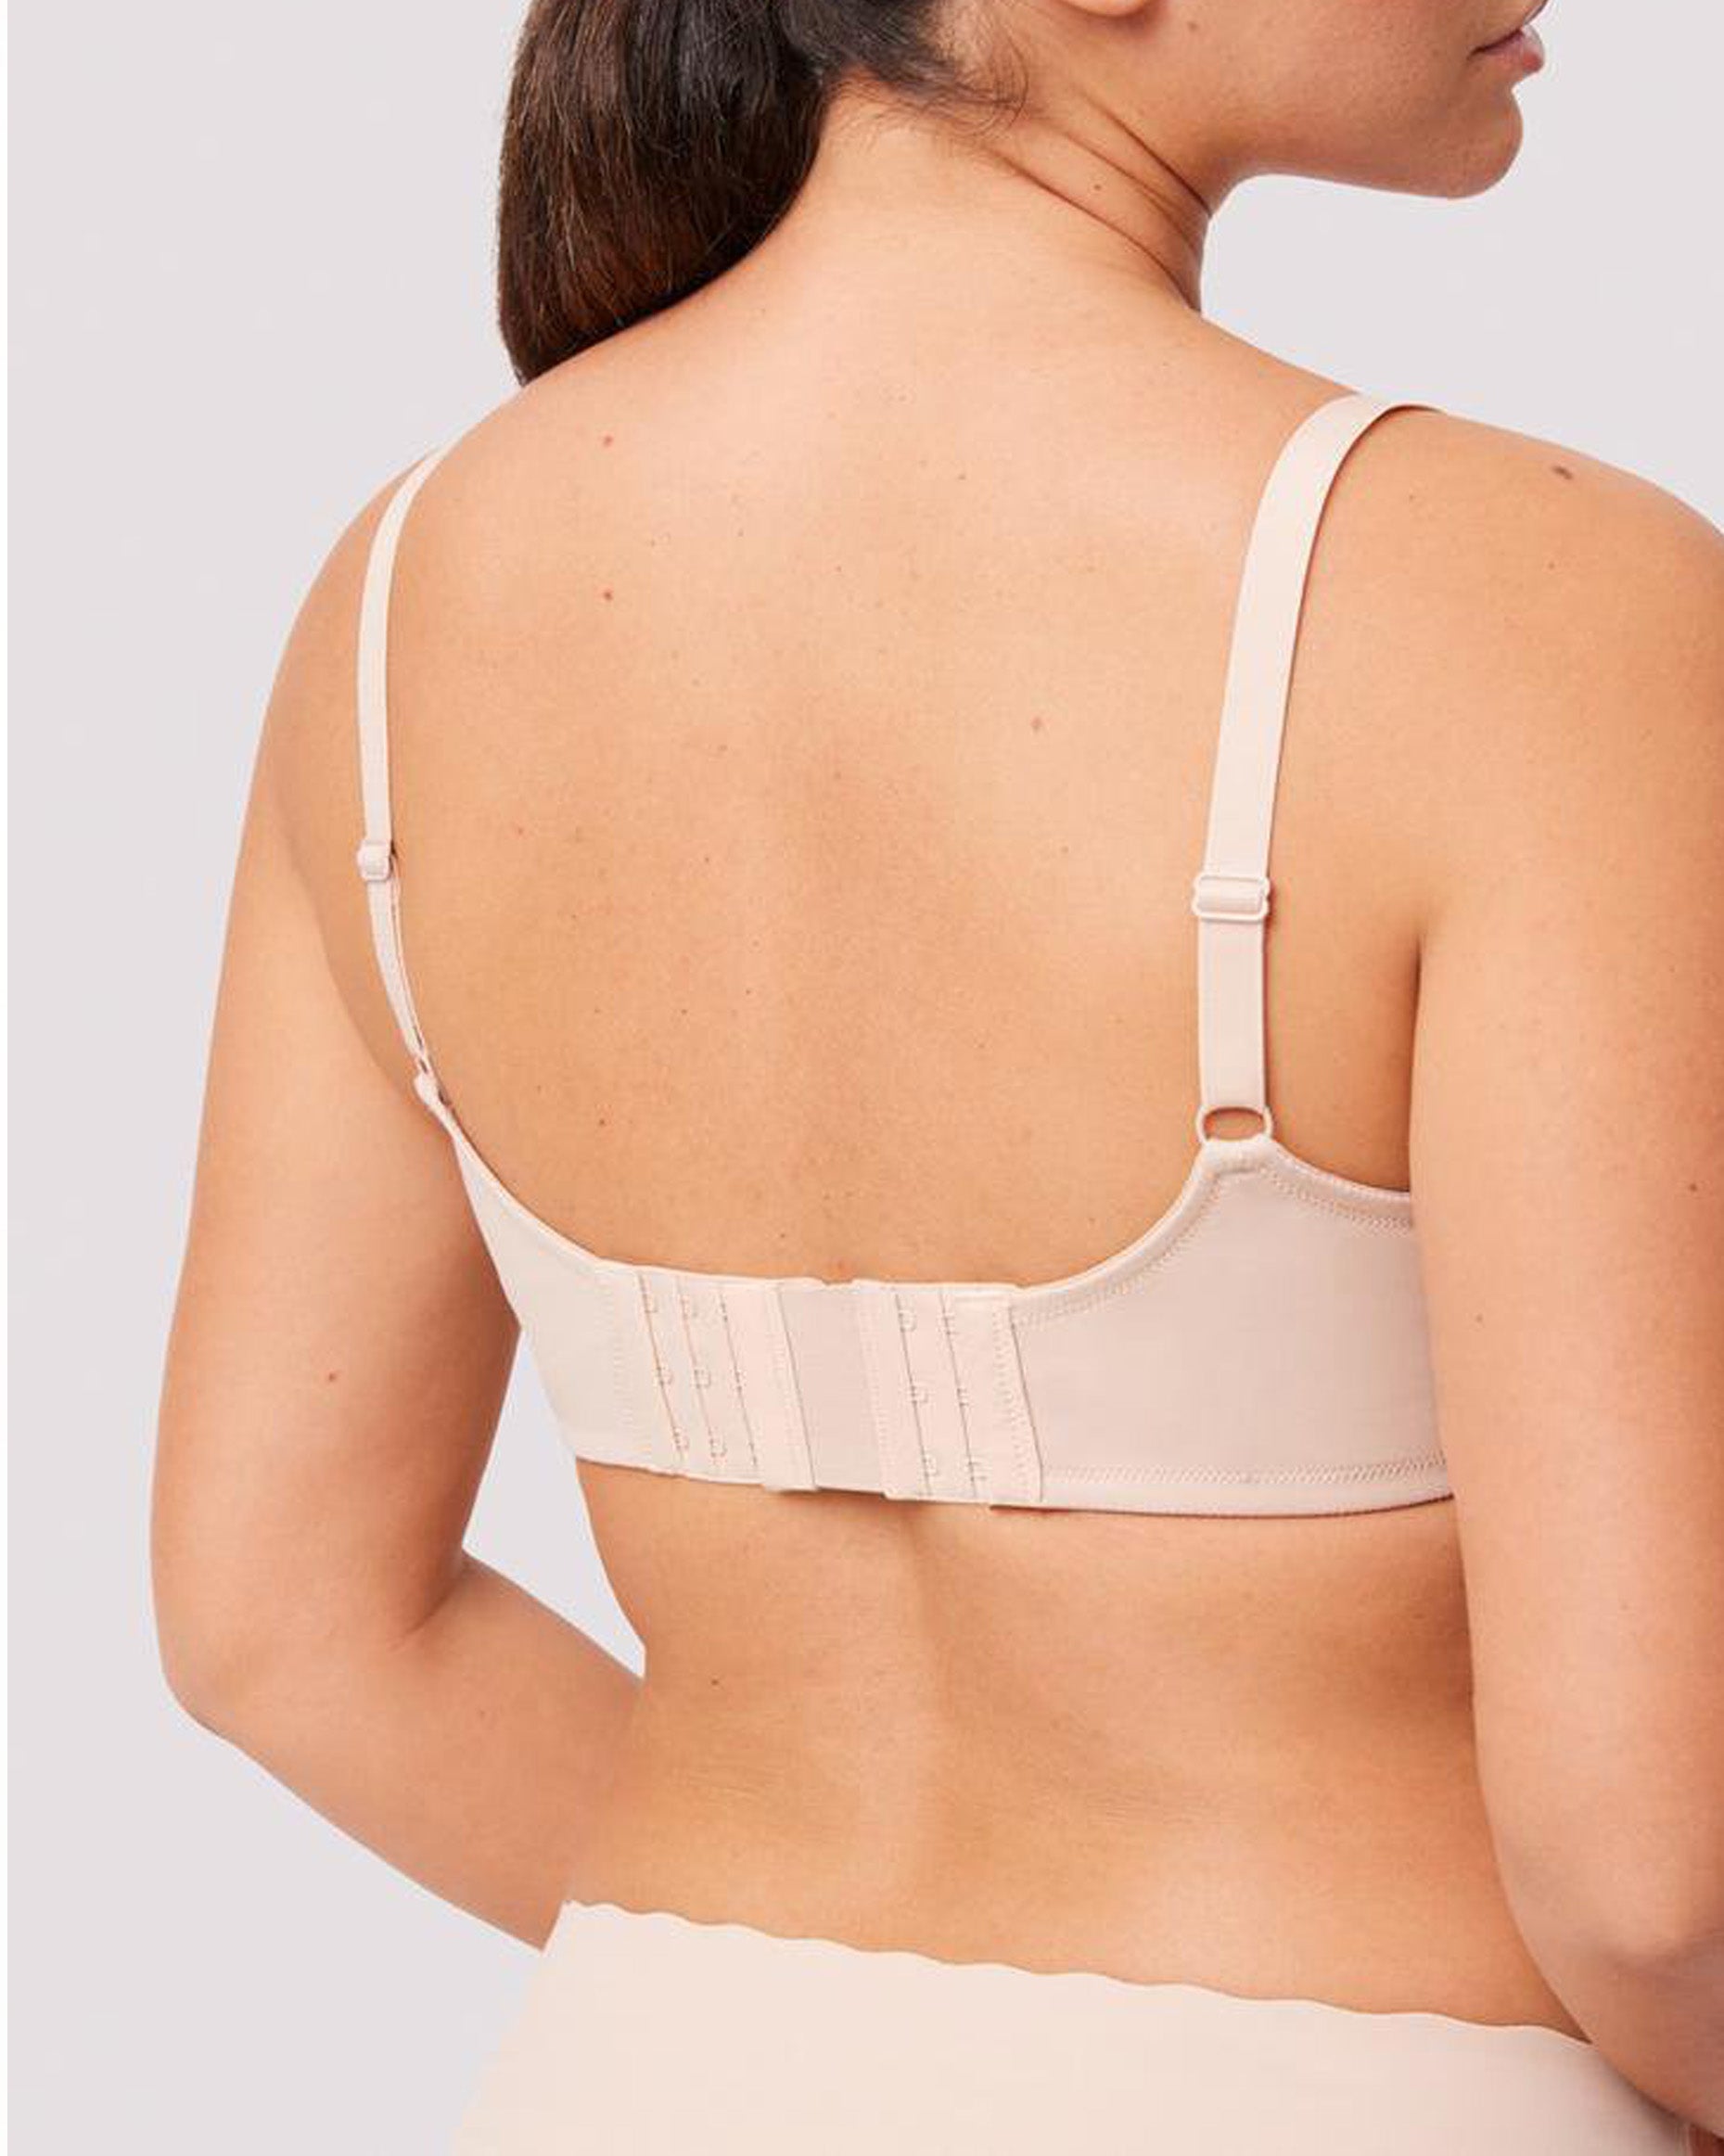 Ysabel Mora 10143 Bra Extender - 3 bra closure extenders with elastic in natural nude. They fit the basic 3 rows of hook-and-eye closures, providing 3 more closing positions so that your bra fits the way you like it.